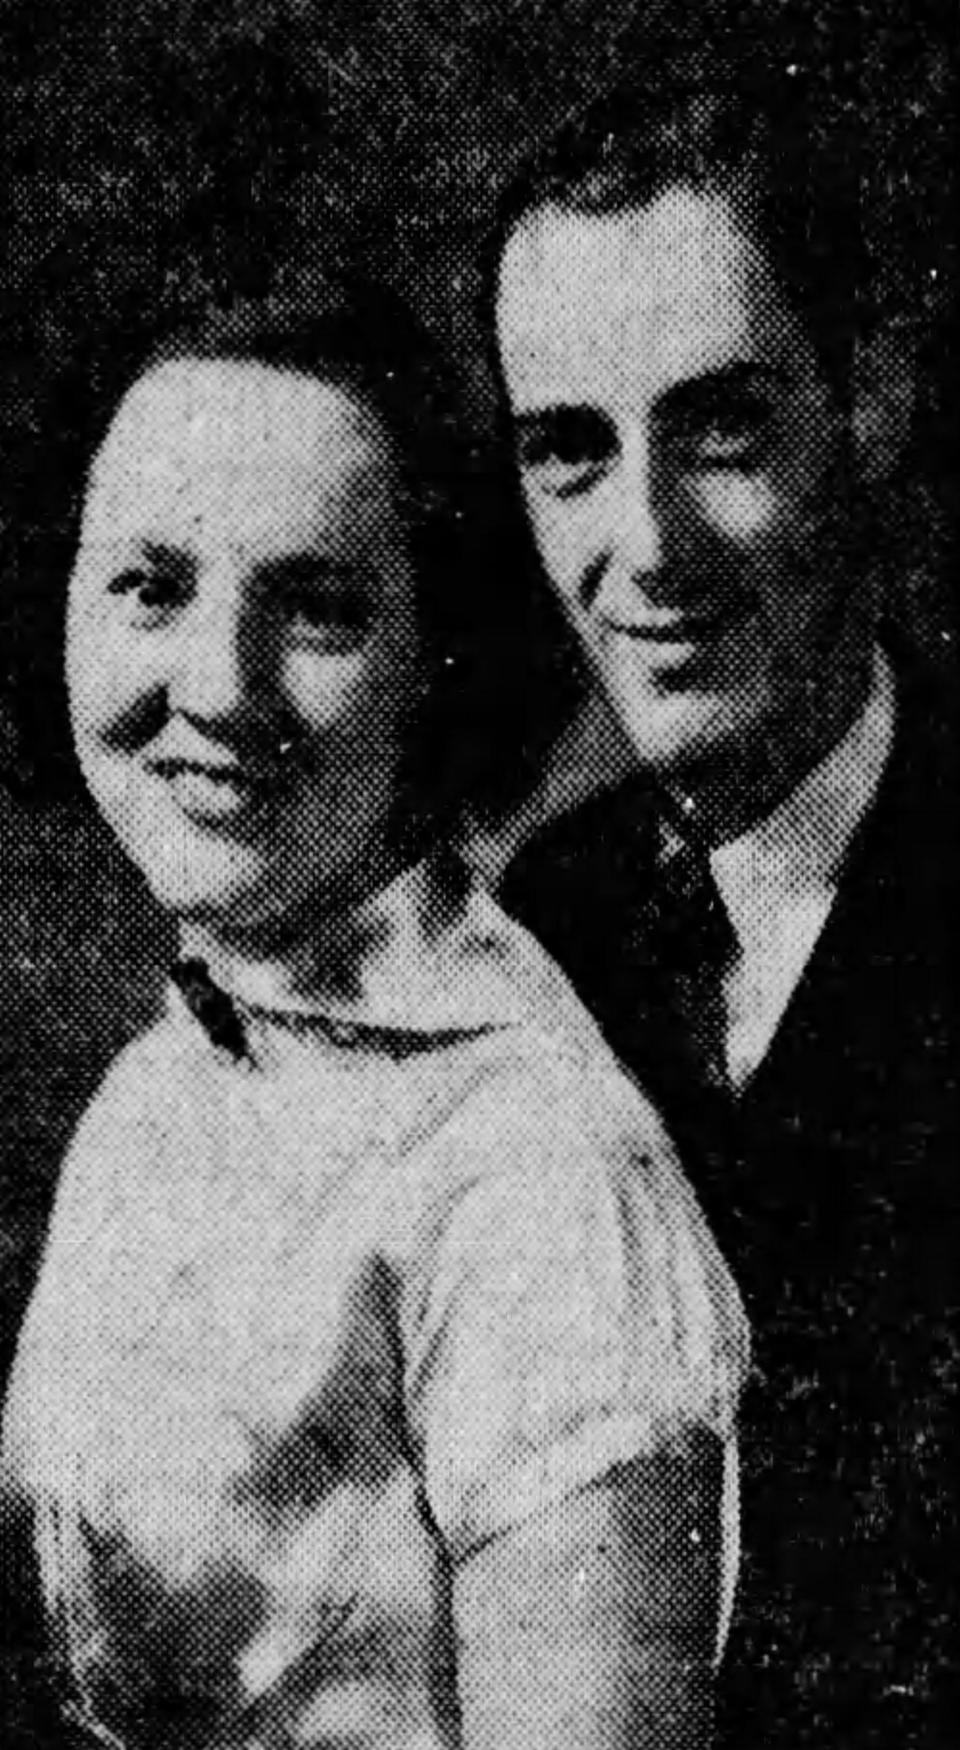 Lillian McKnight married Francis Grell on Oct. 21, 1936, at the Akron Armory.